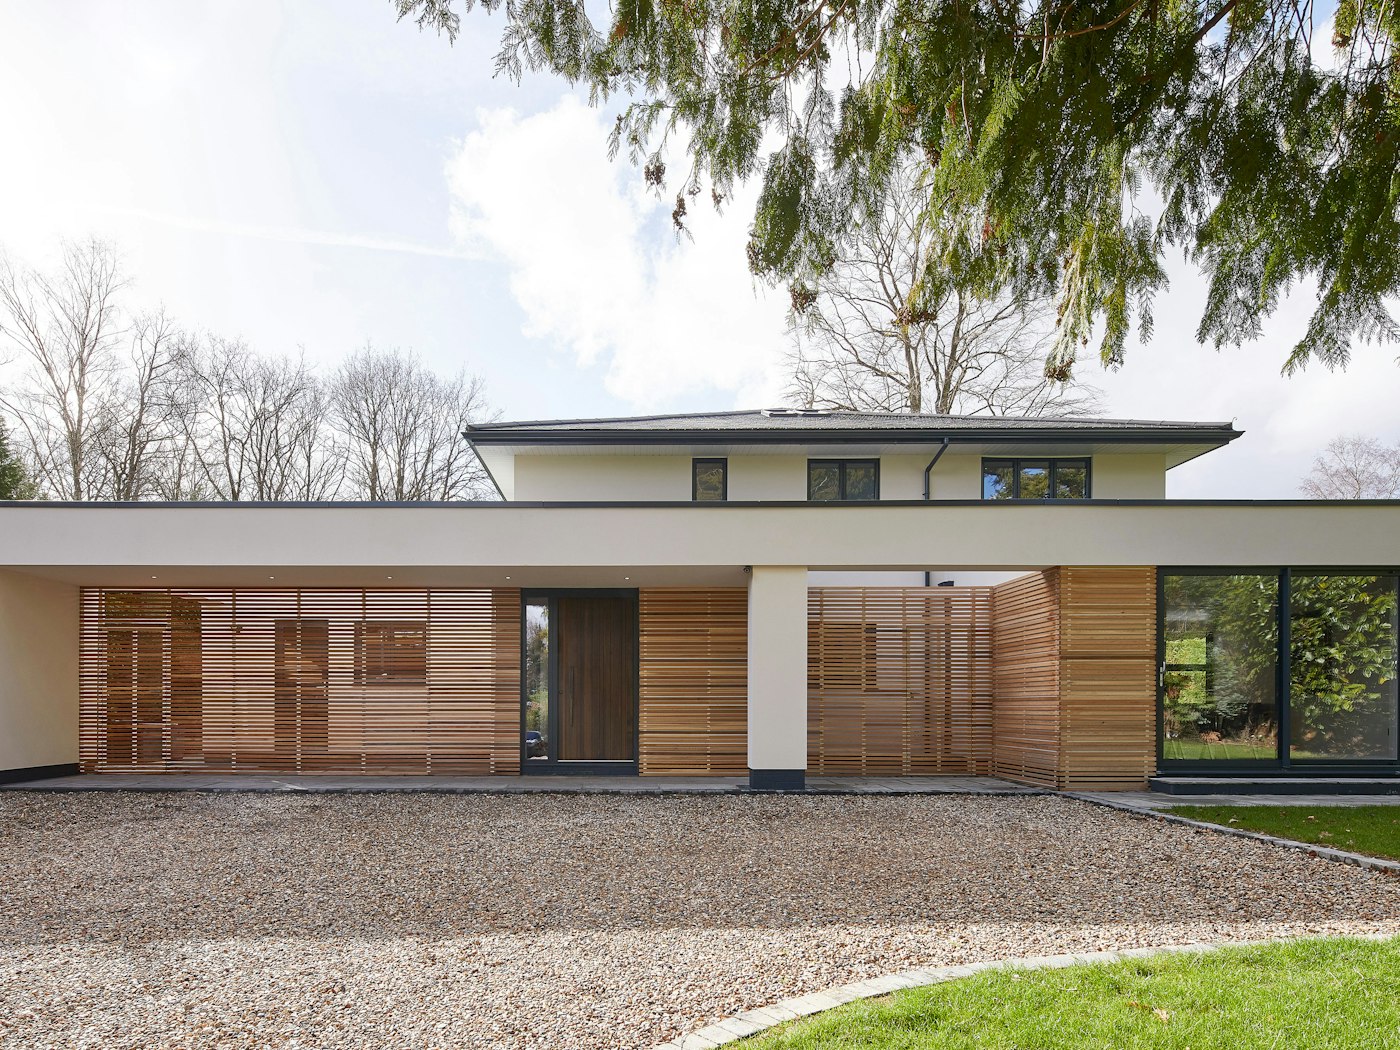 A wonderful example of modern architecture with a fumed oak wood front door